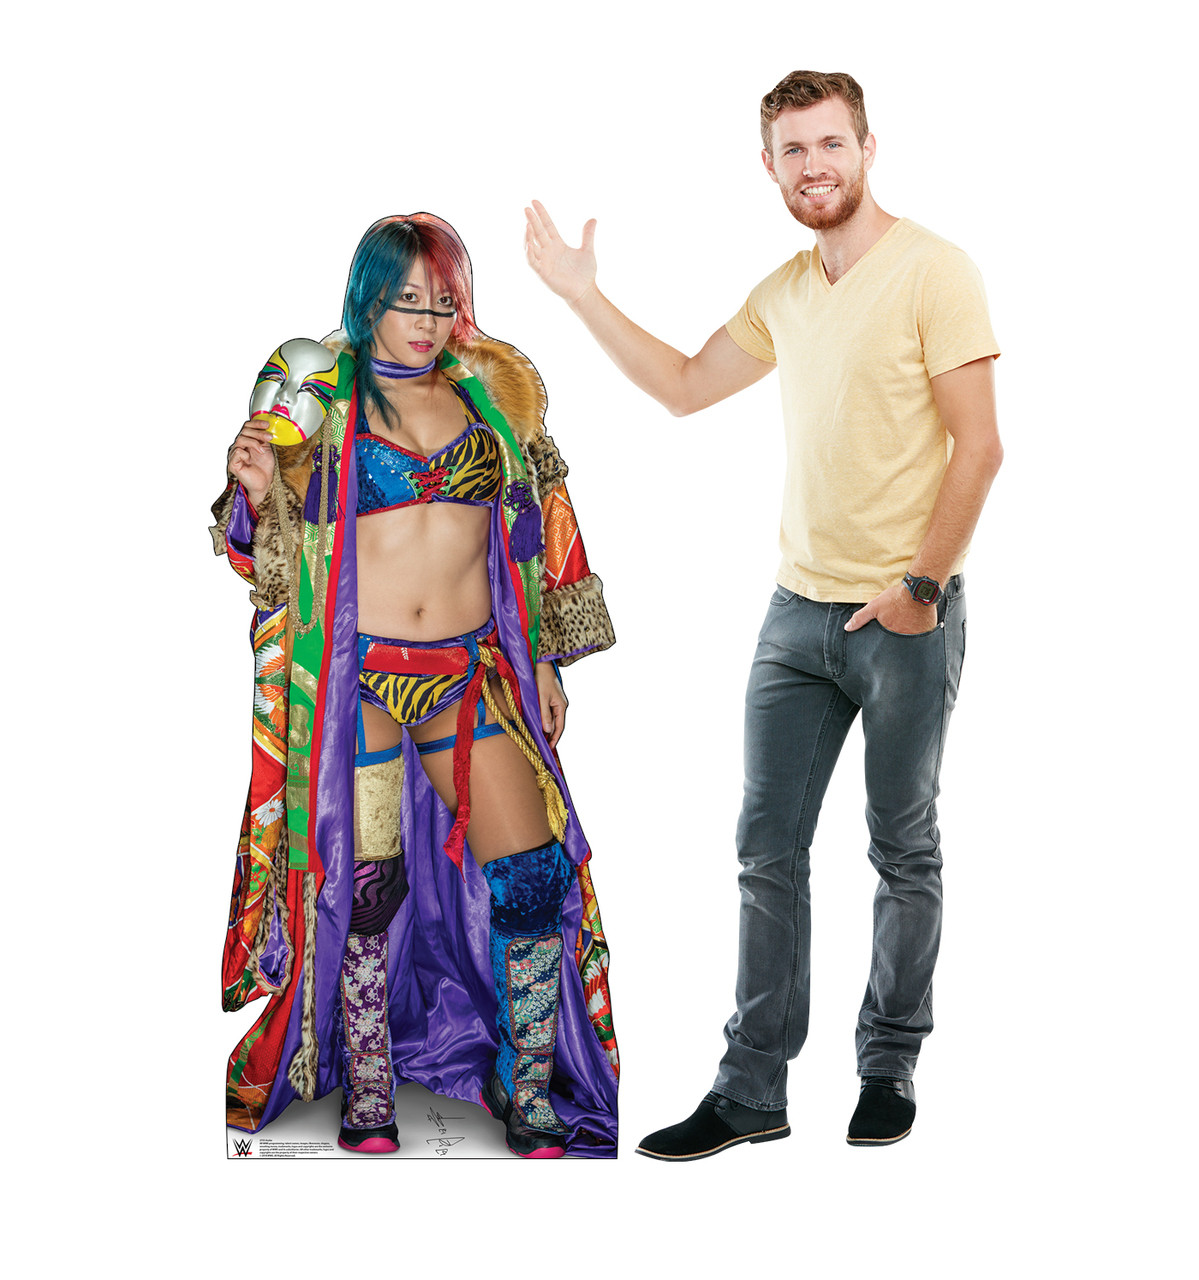 Asuka Life-size cardboard standee front.